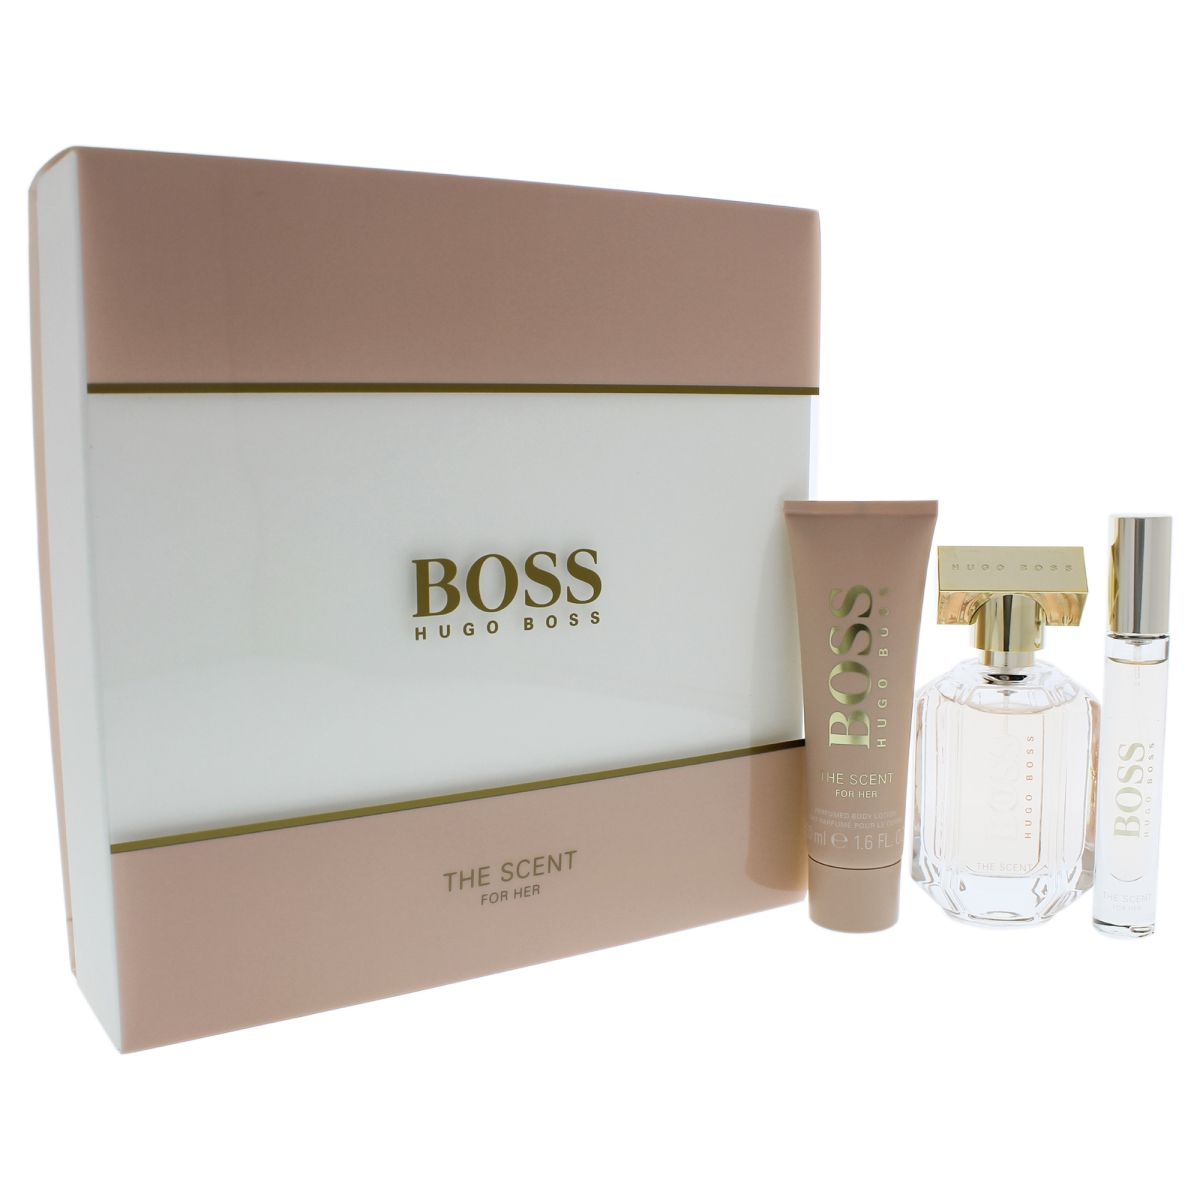 EAN 8005610256450 product image for I0085189 Boss The Scent 3 Piece Gift Set for Women | upcitemdb.com